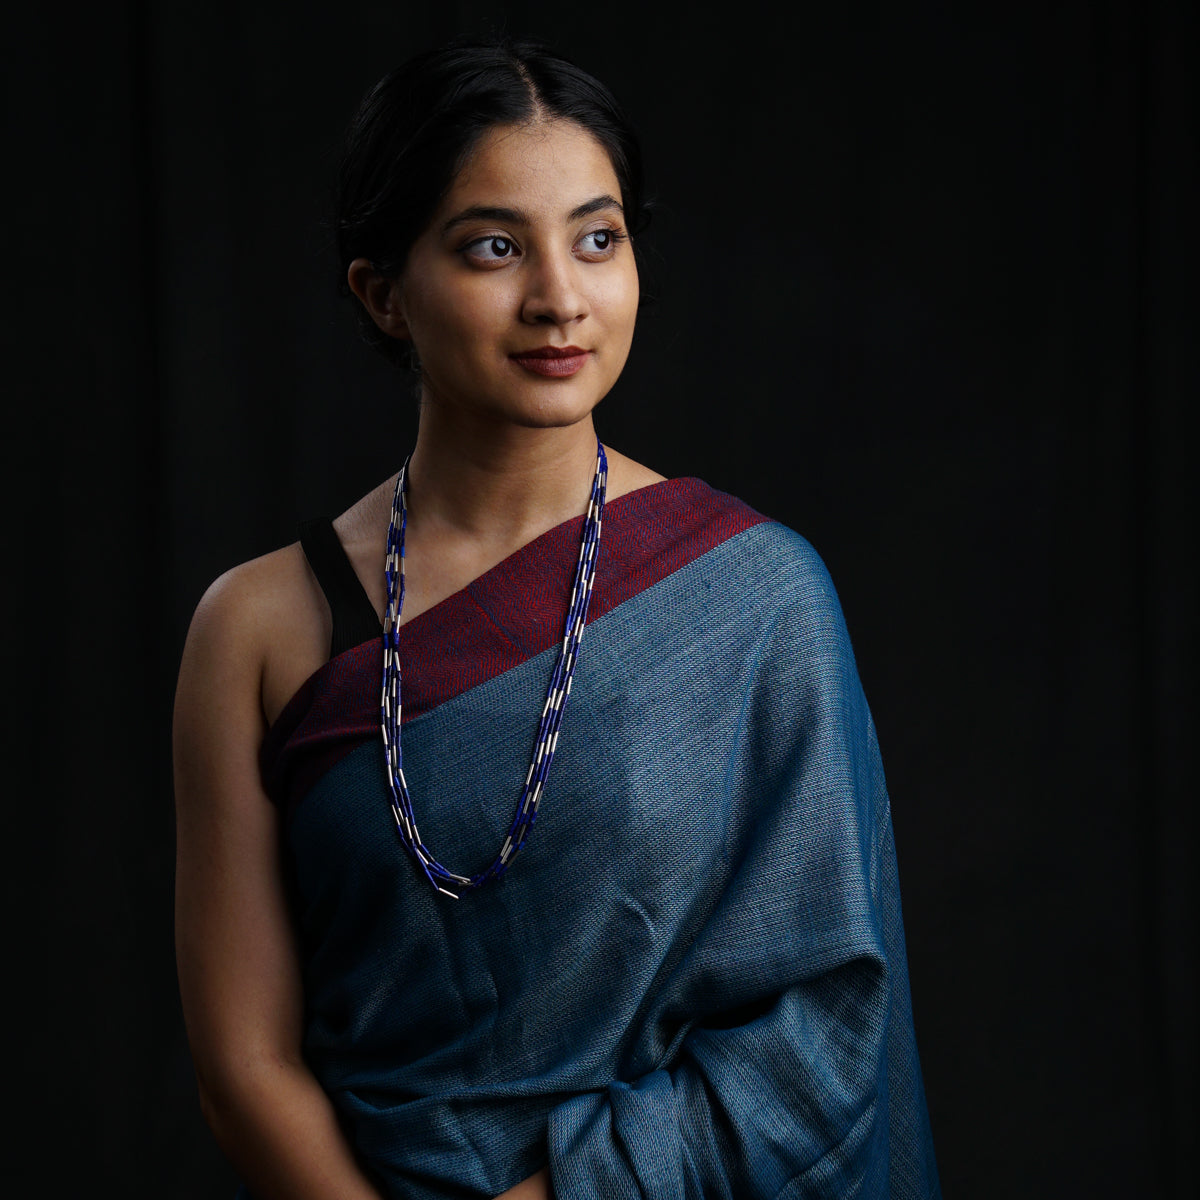 a woman in a sari with a necklace on her neck